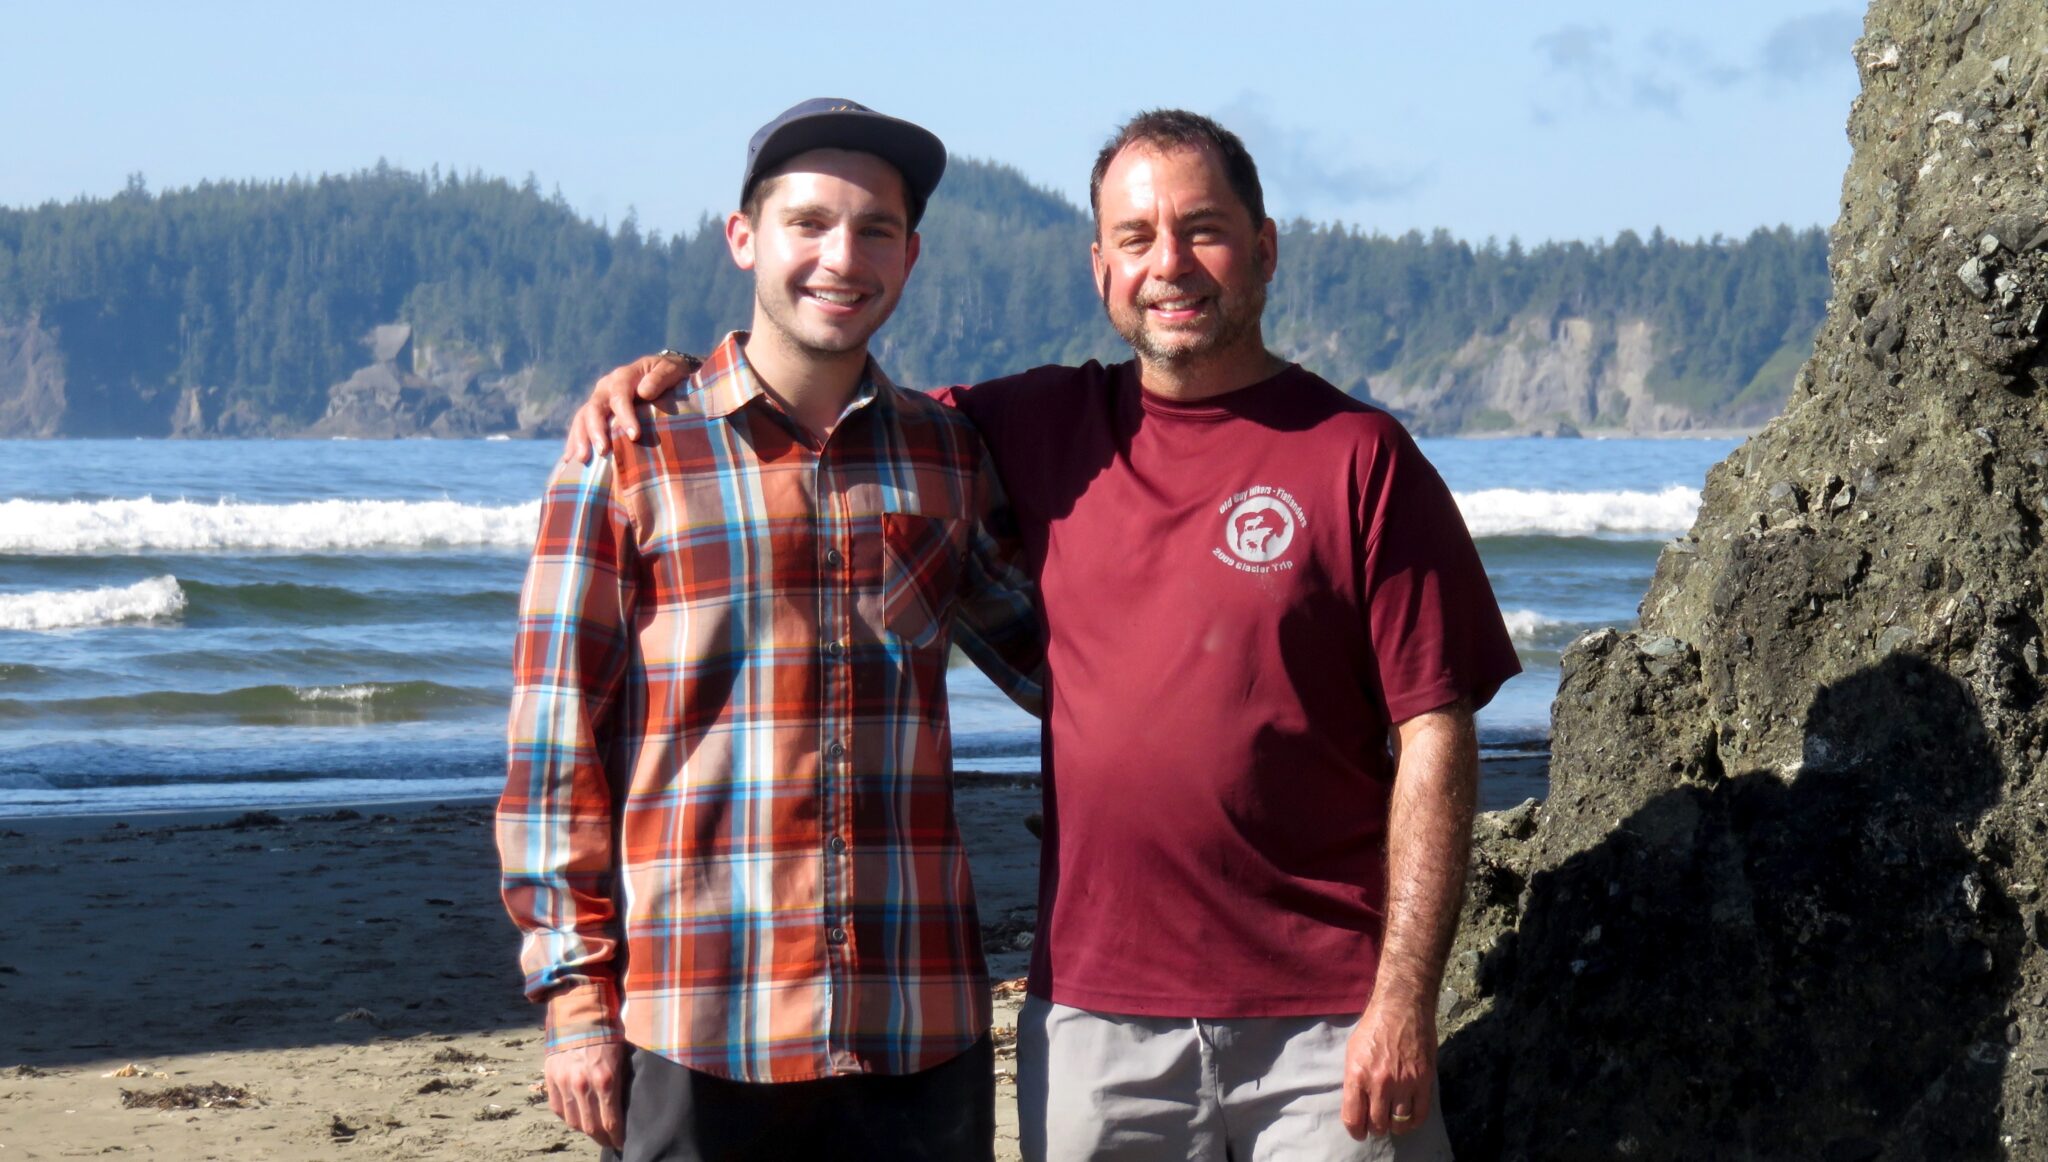 Close connections and remote work: Investor in Seattle helped Ohio dad land at portfolio company